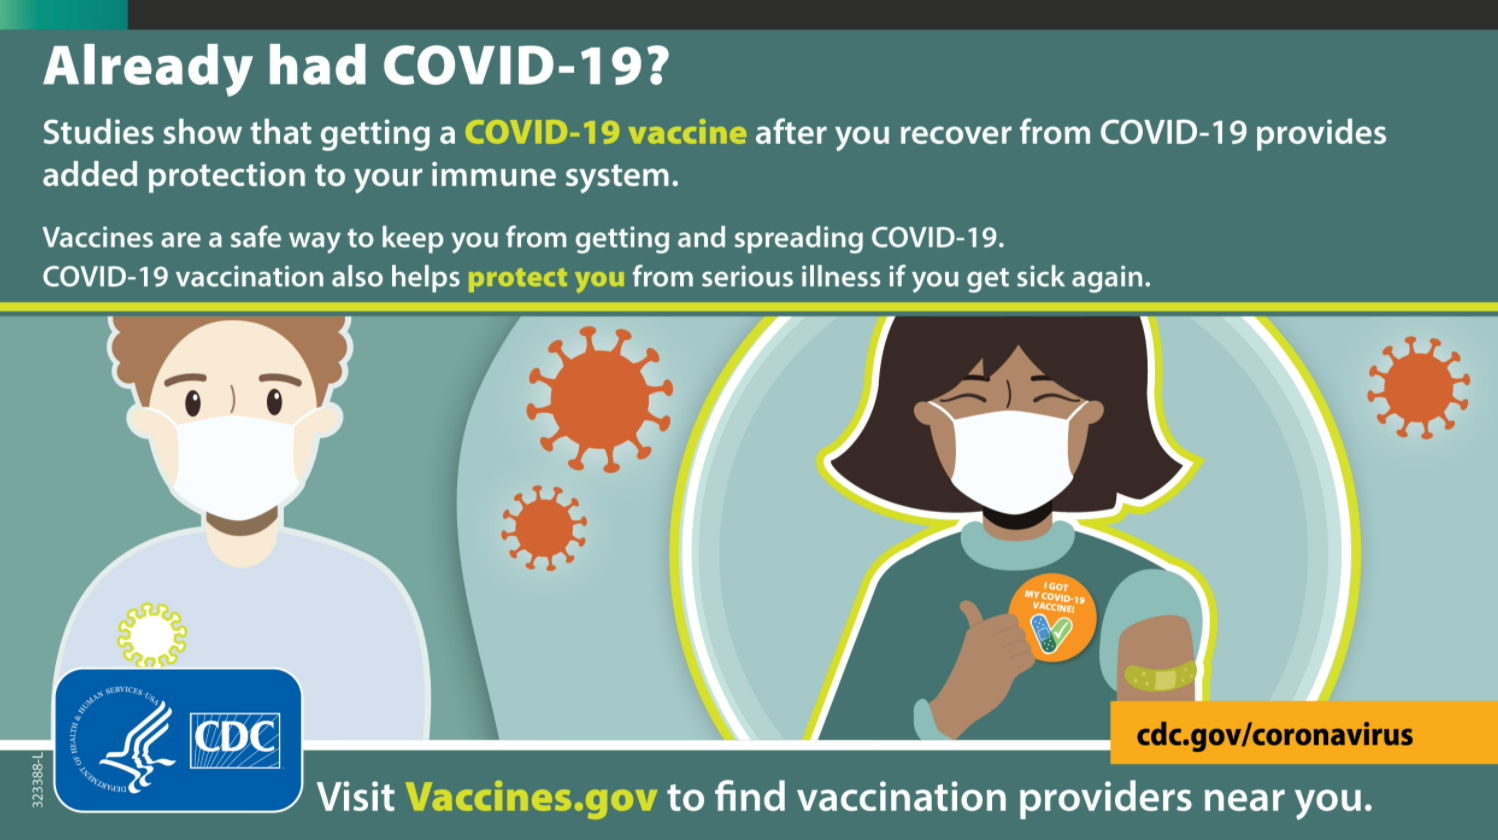 The image shows two animated people beneath the text. One is a man who appears to only be protected by virus antibodies and the other is a woman giving a thumbs up, who is protected by the vaccine and antibodies. 